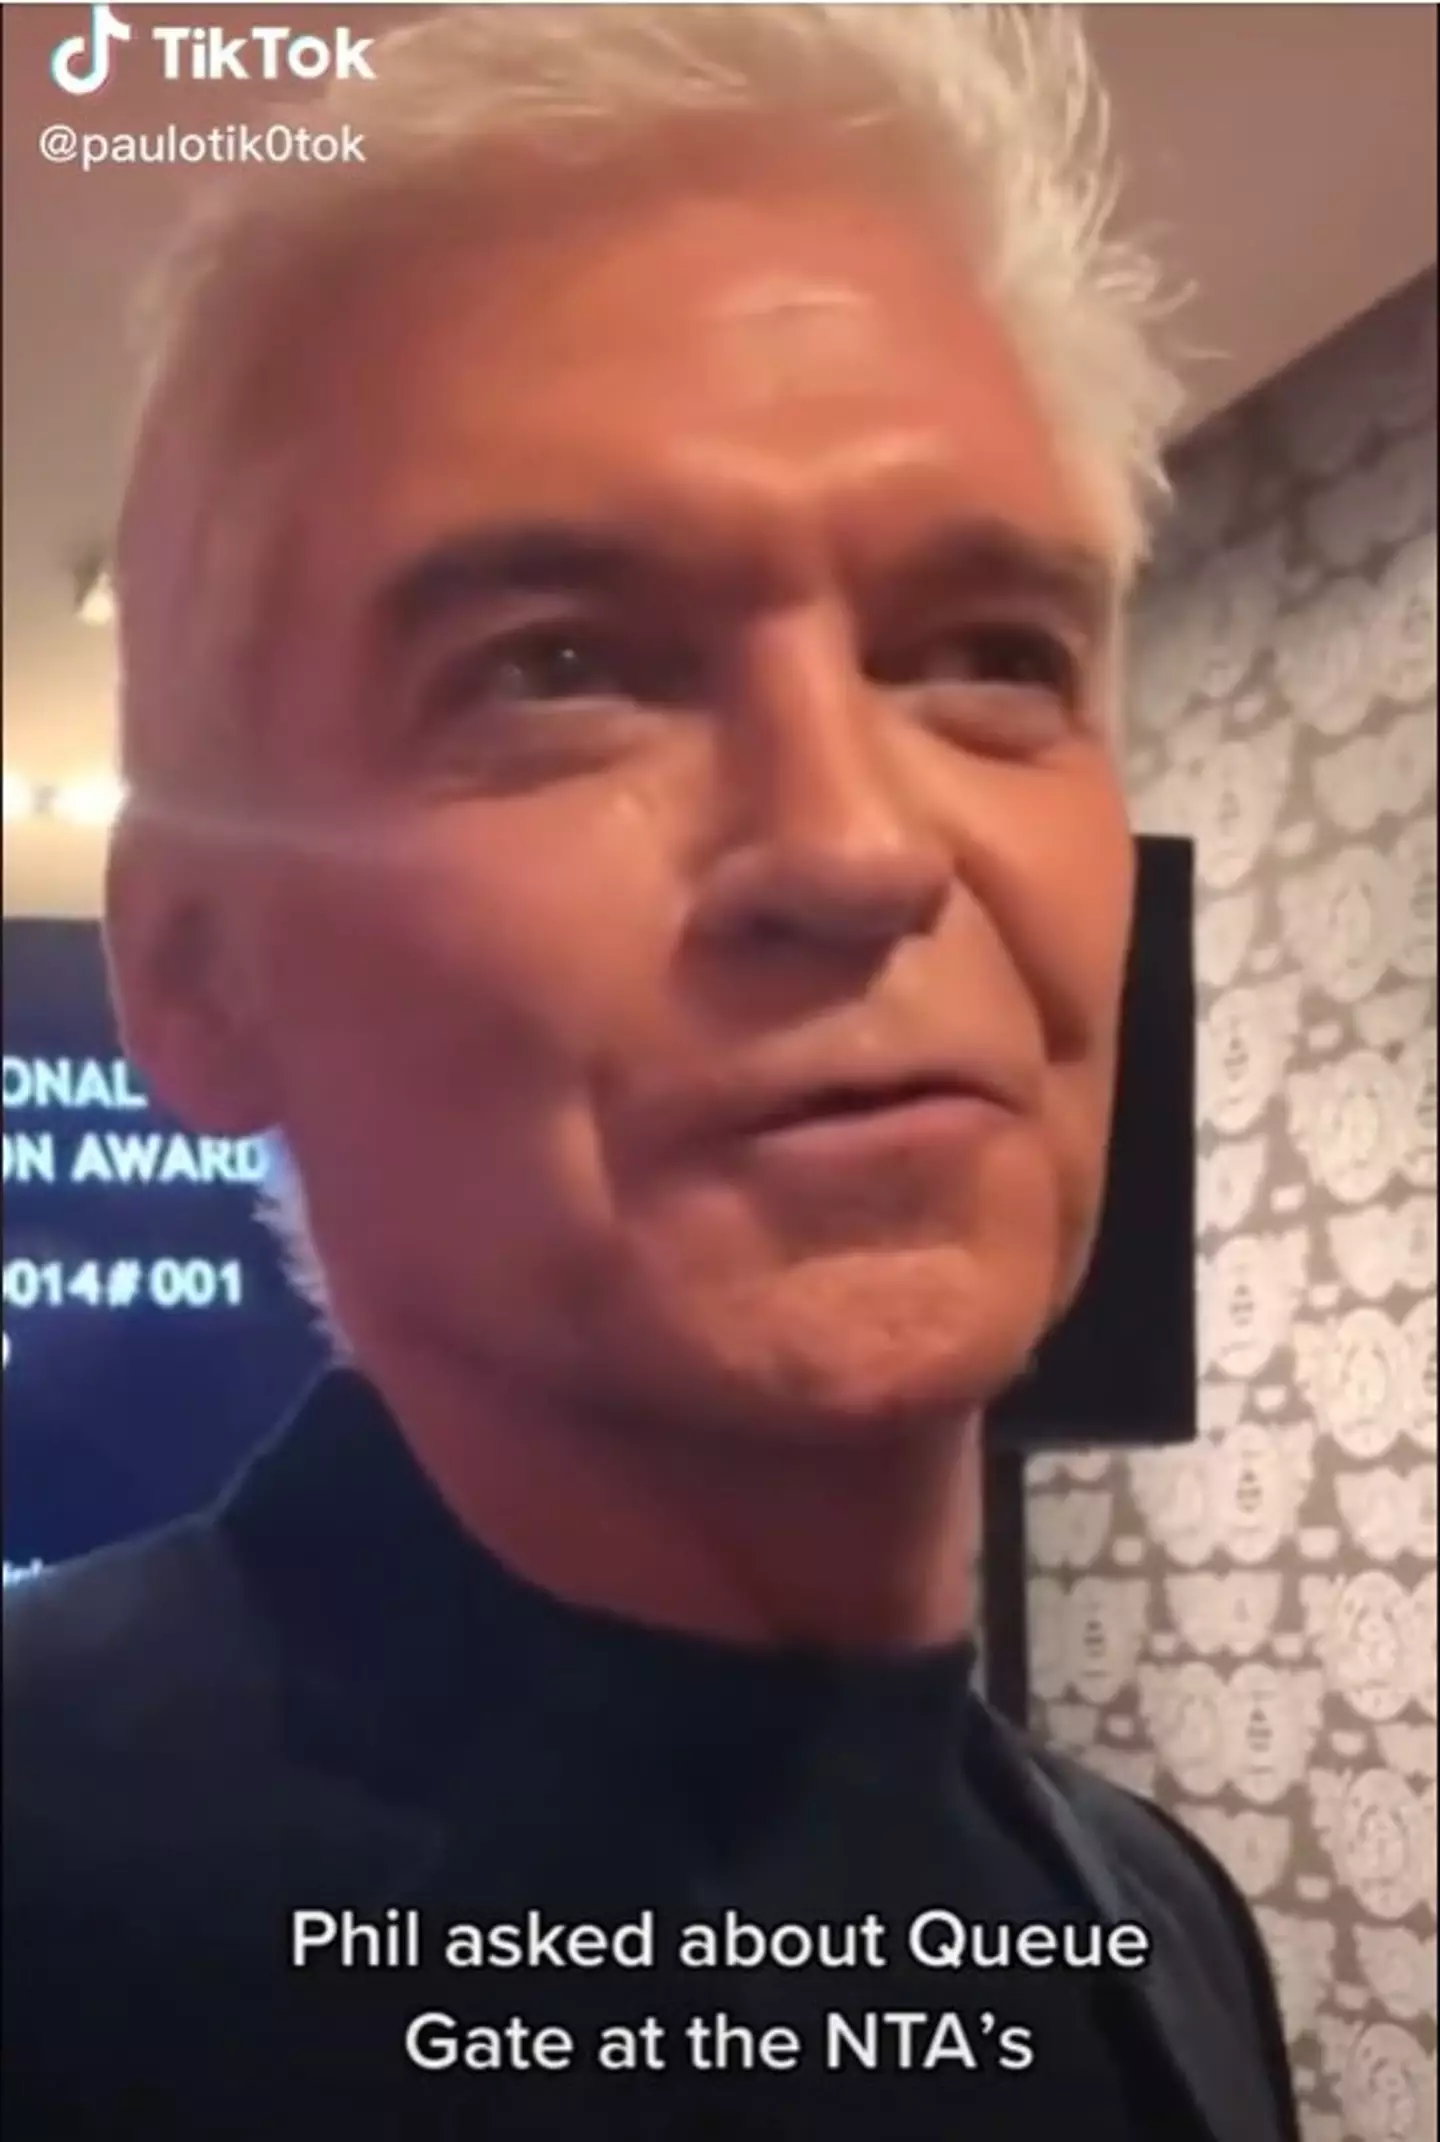 Phillip Schofield looked awkward at the line of questioning.